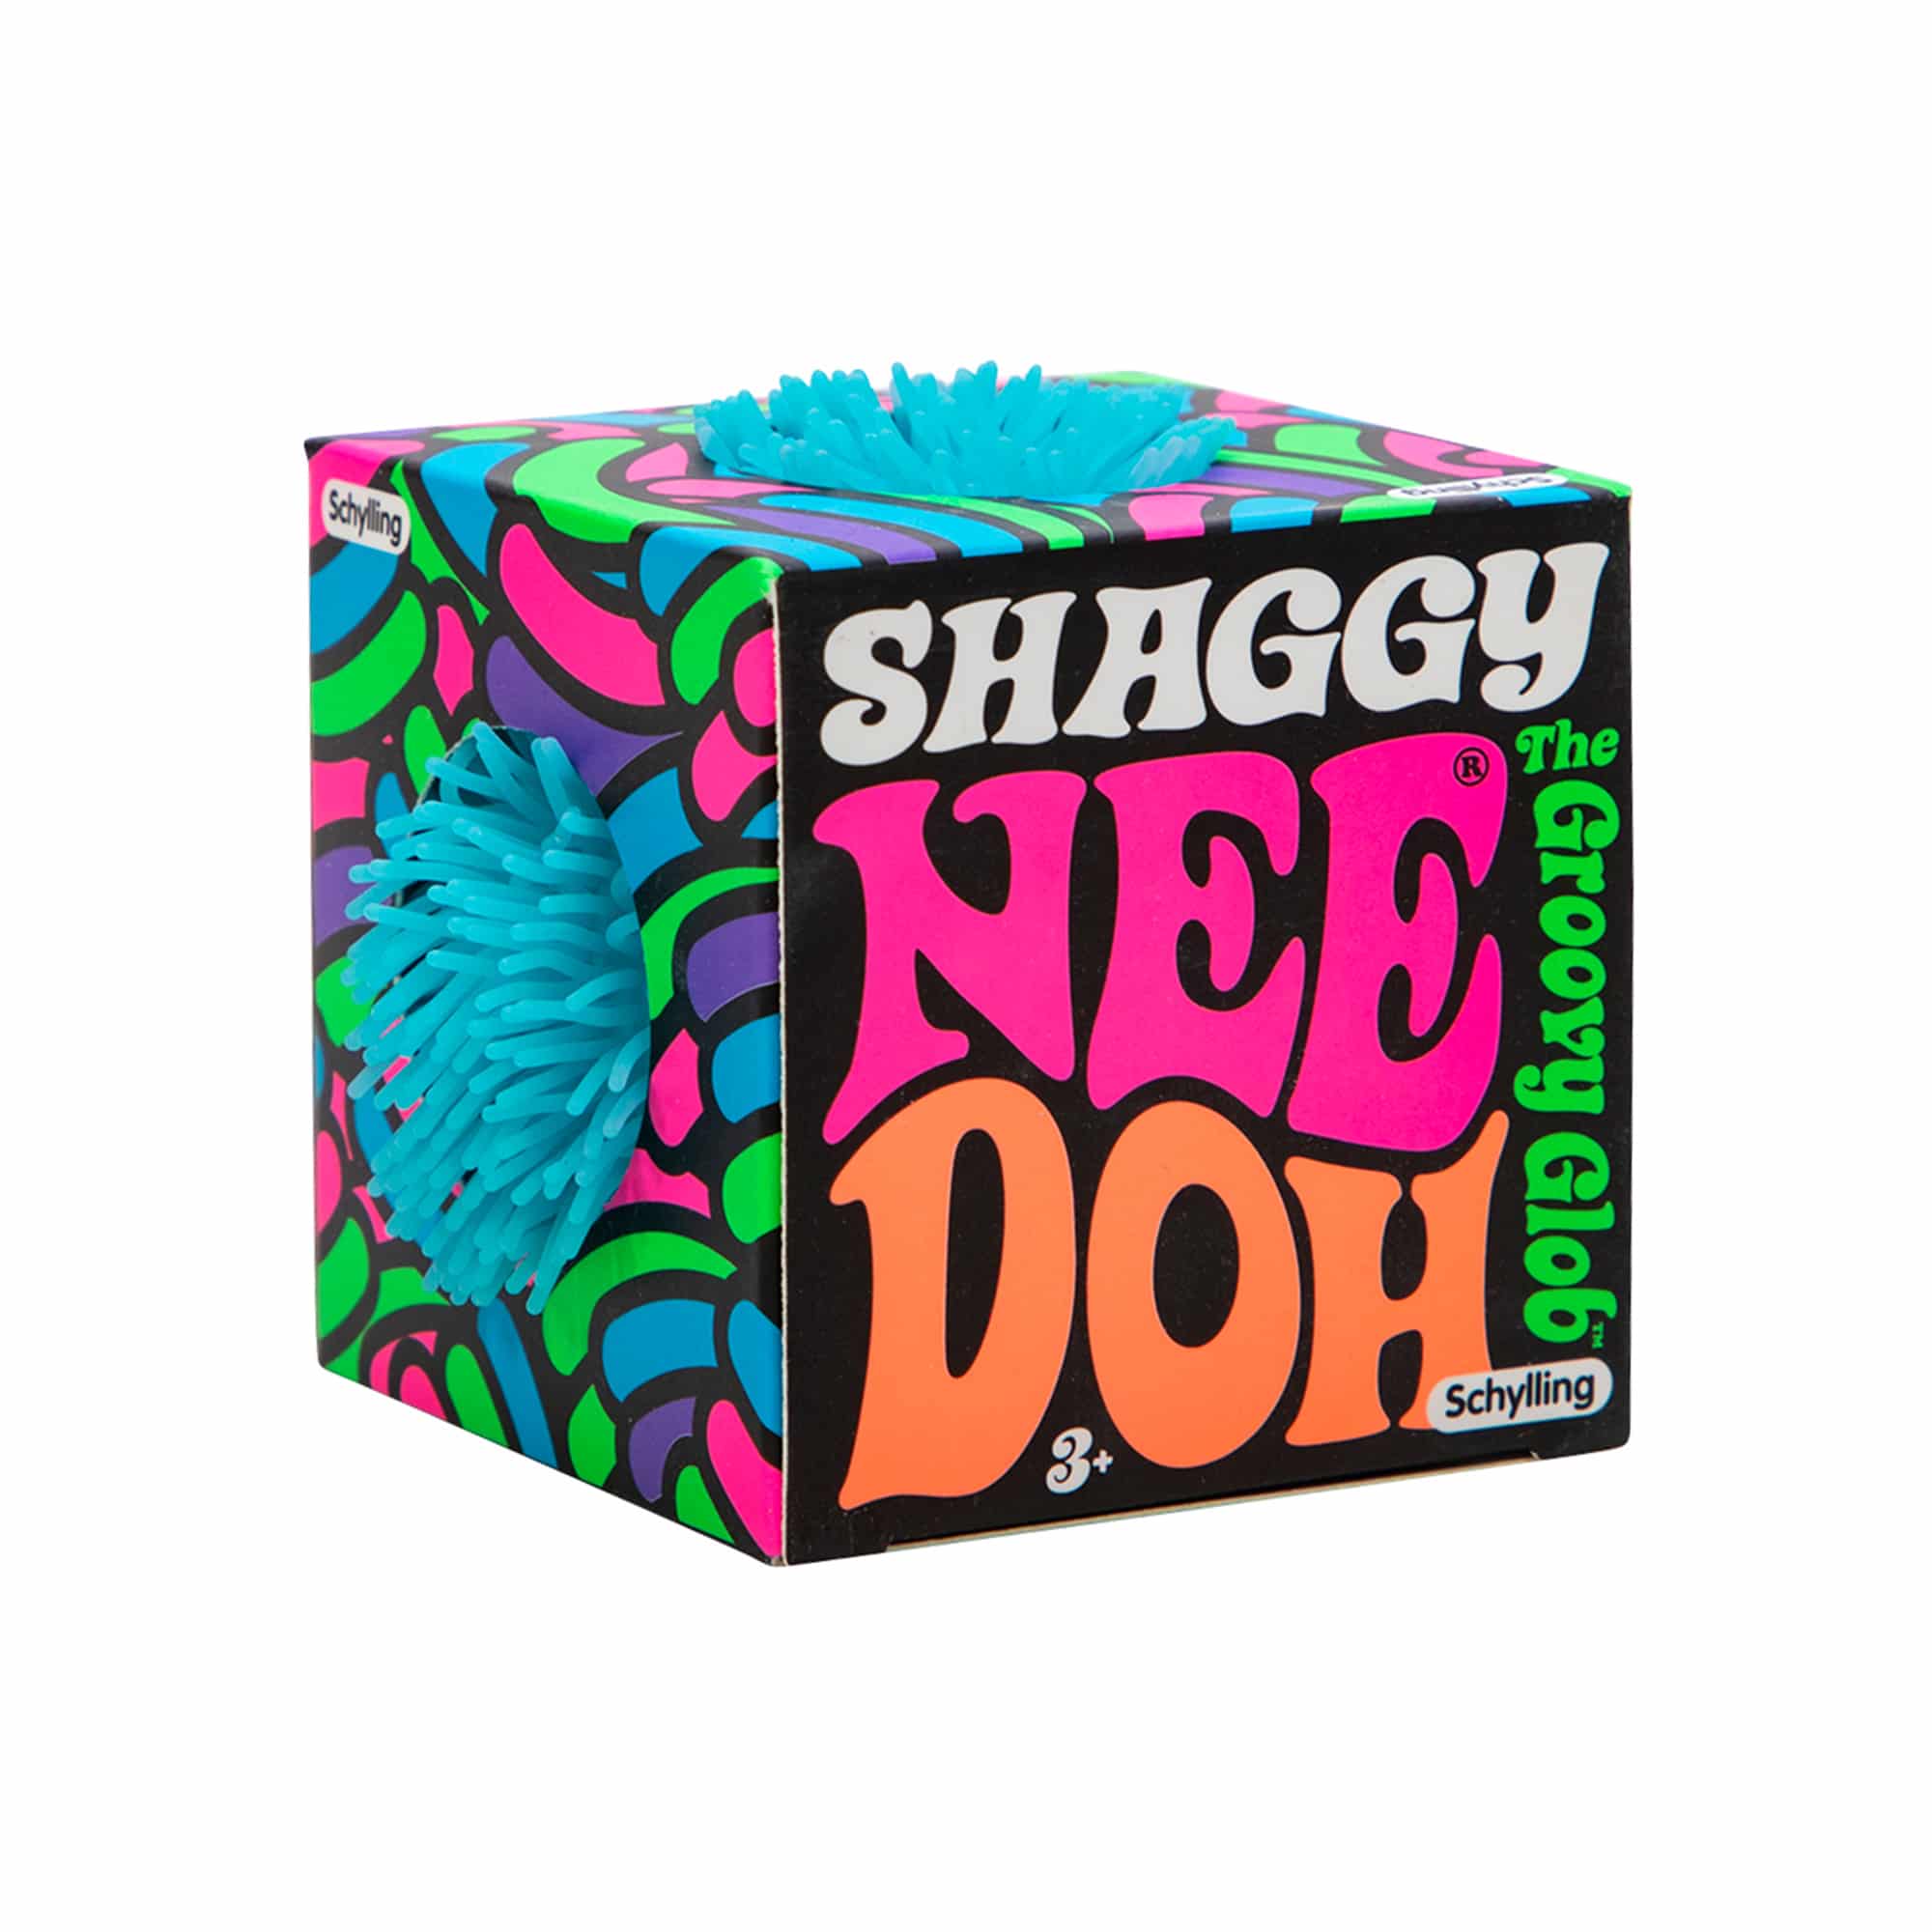 The blue Shaggy NeeDoh in the product packaging.